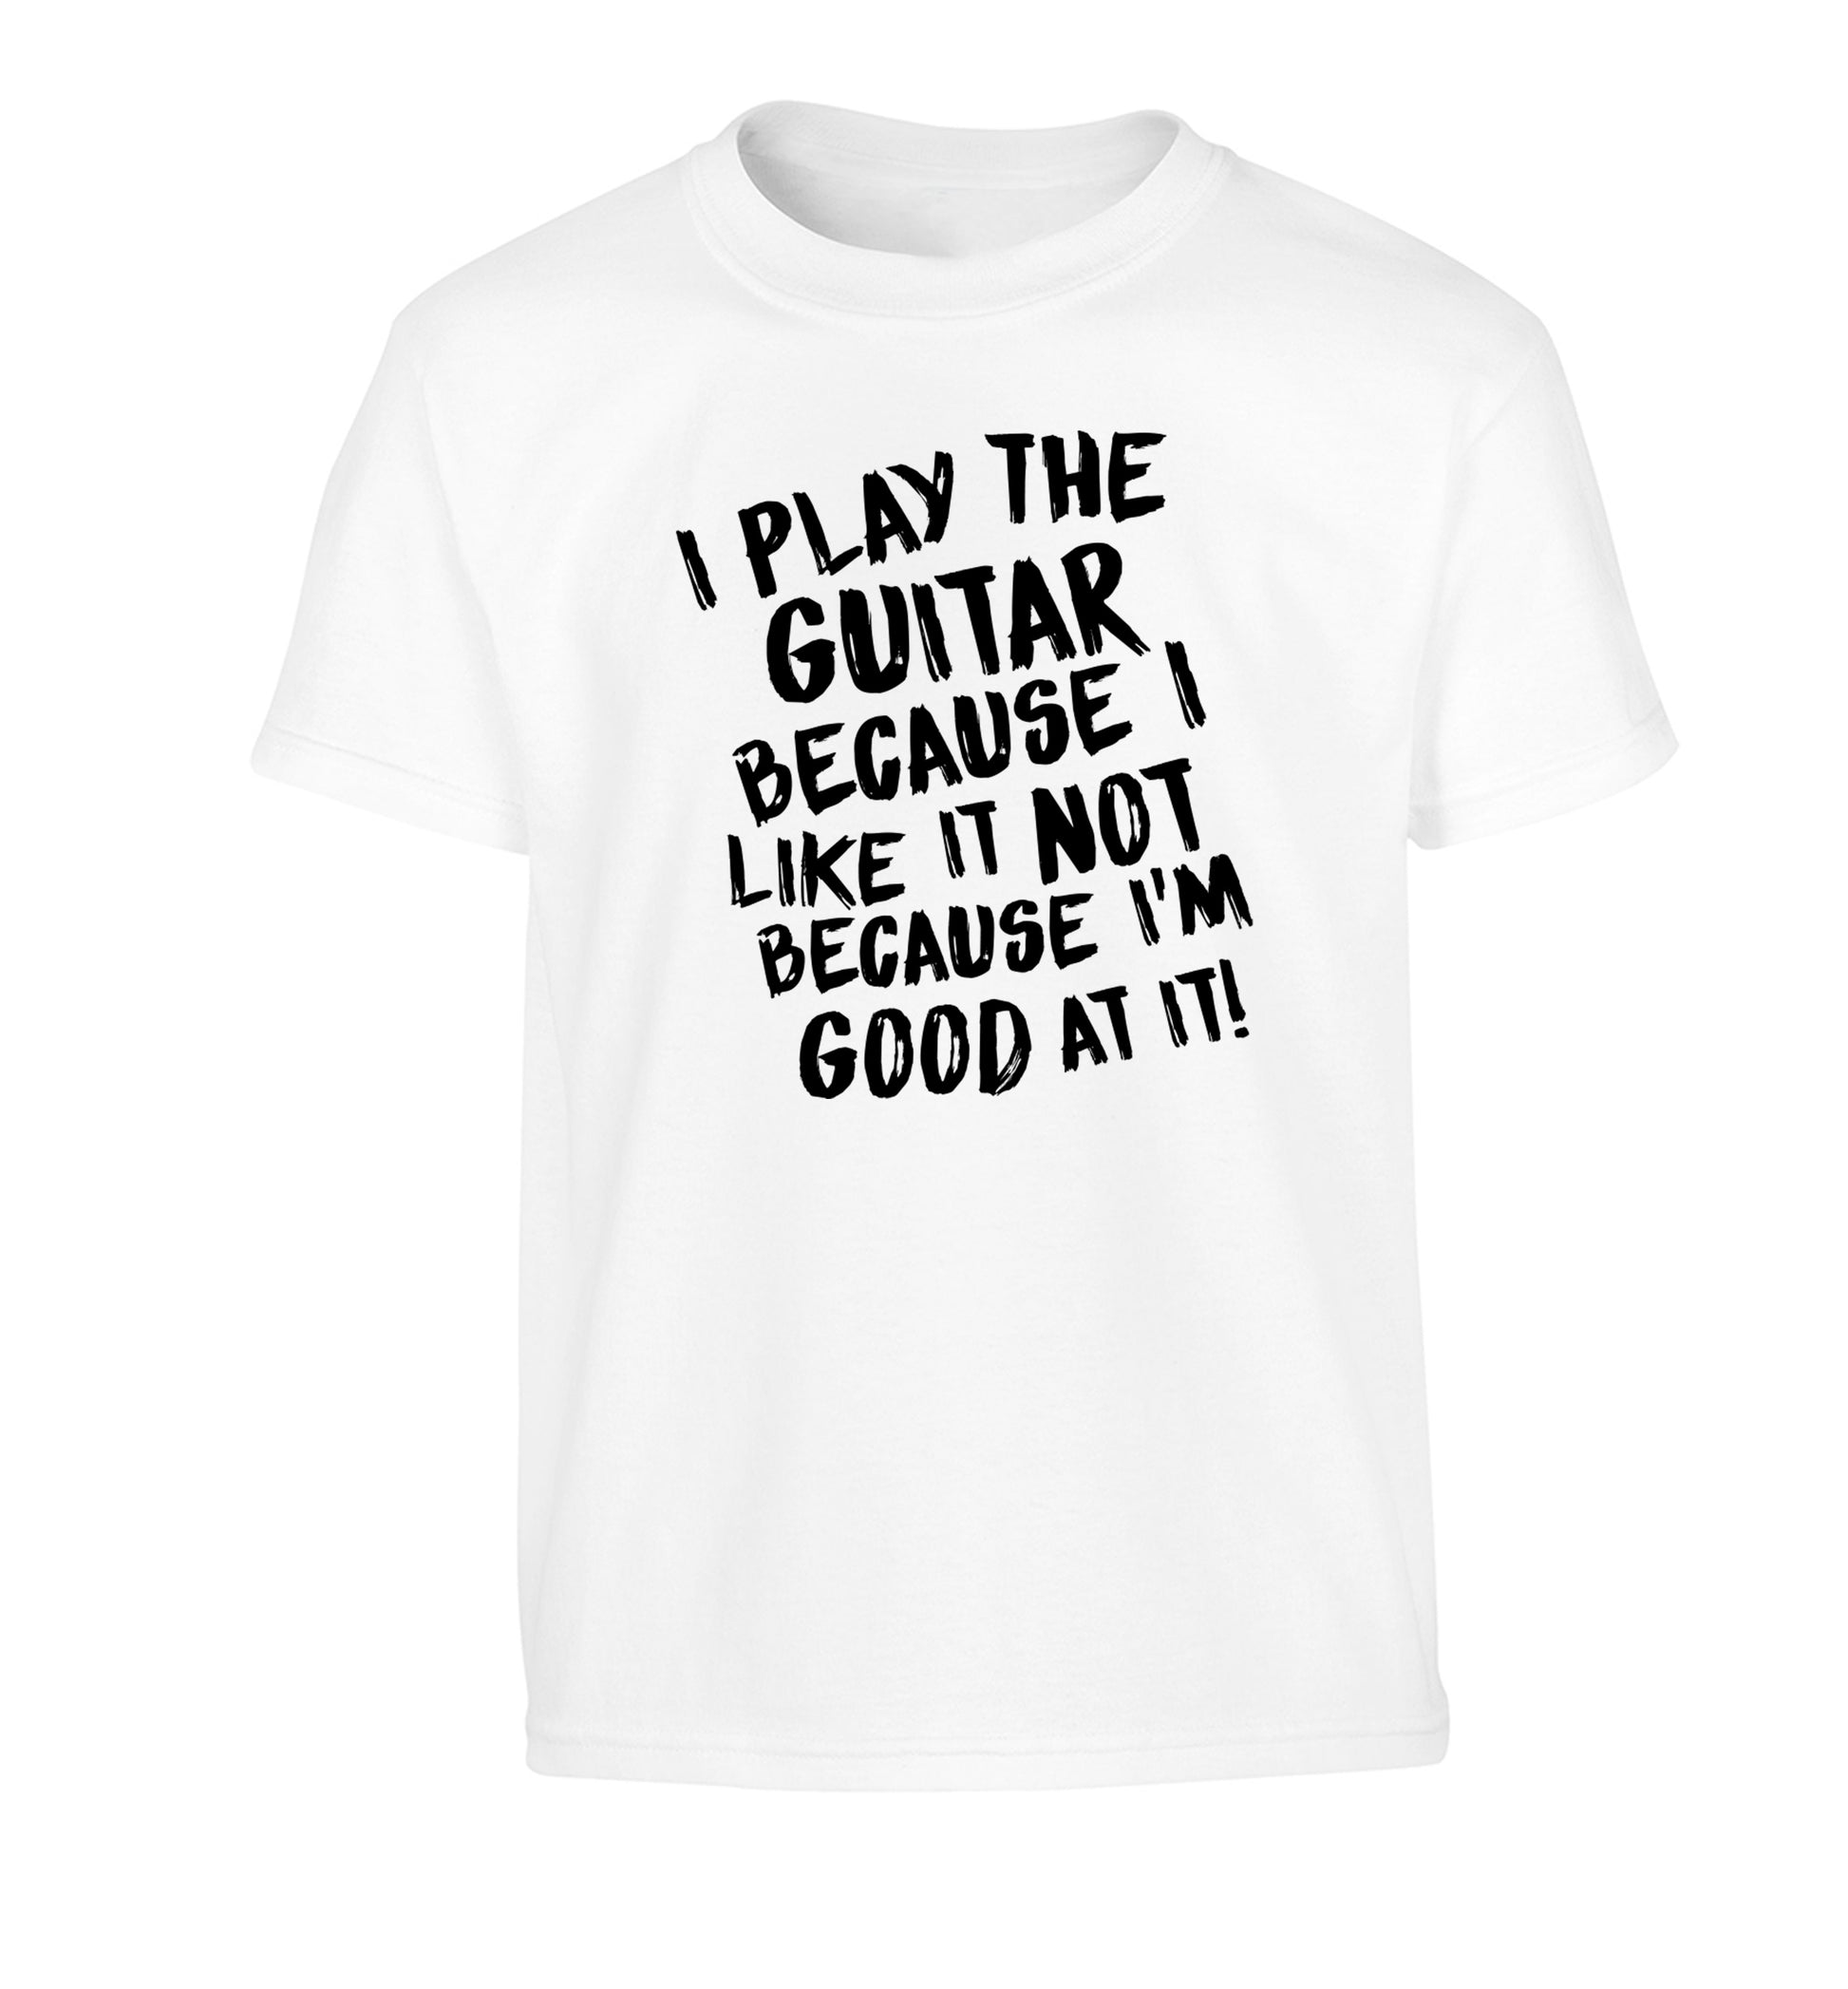 I play the guitar because I like it not because I'm good at it Children's white Tshirt 12-14 Years